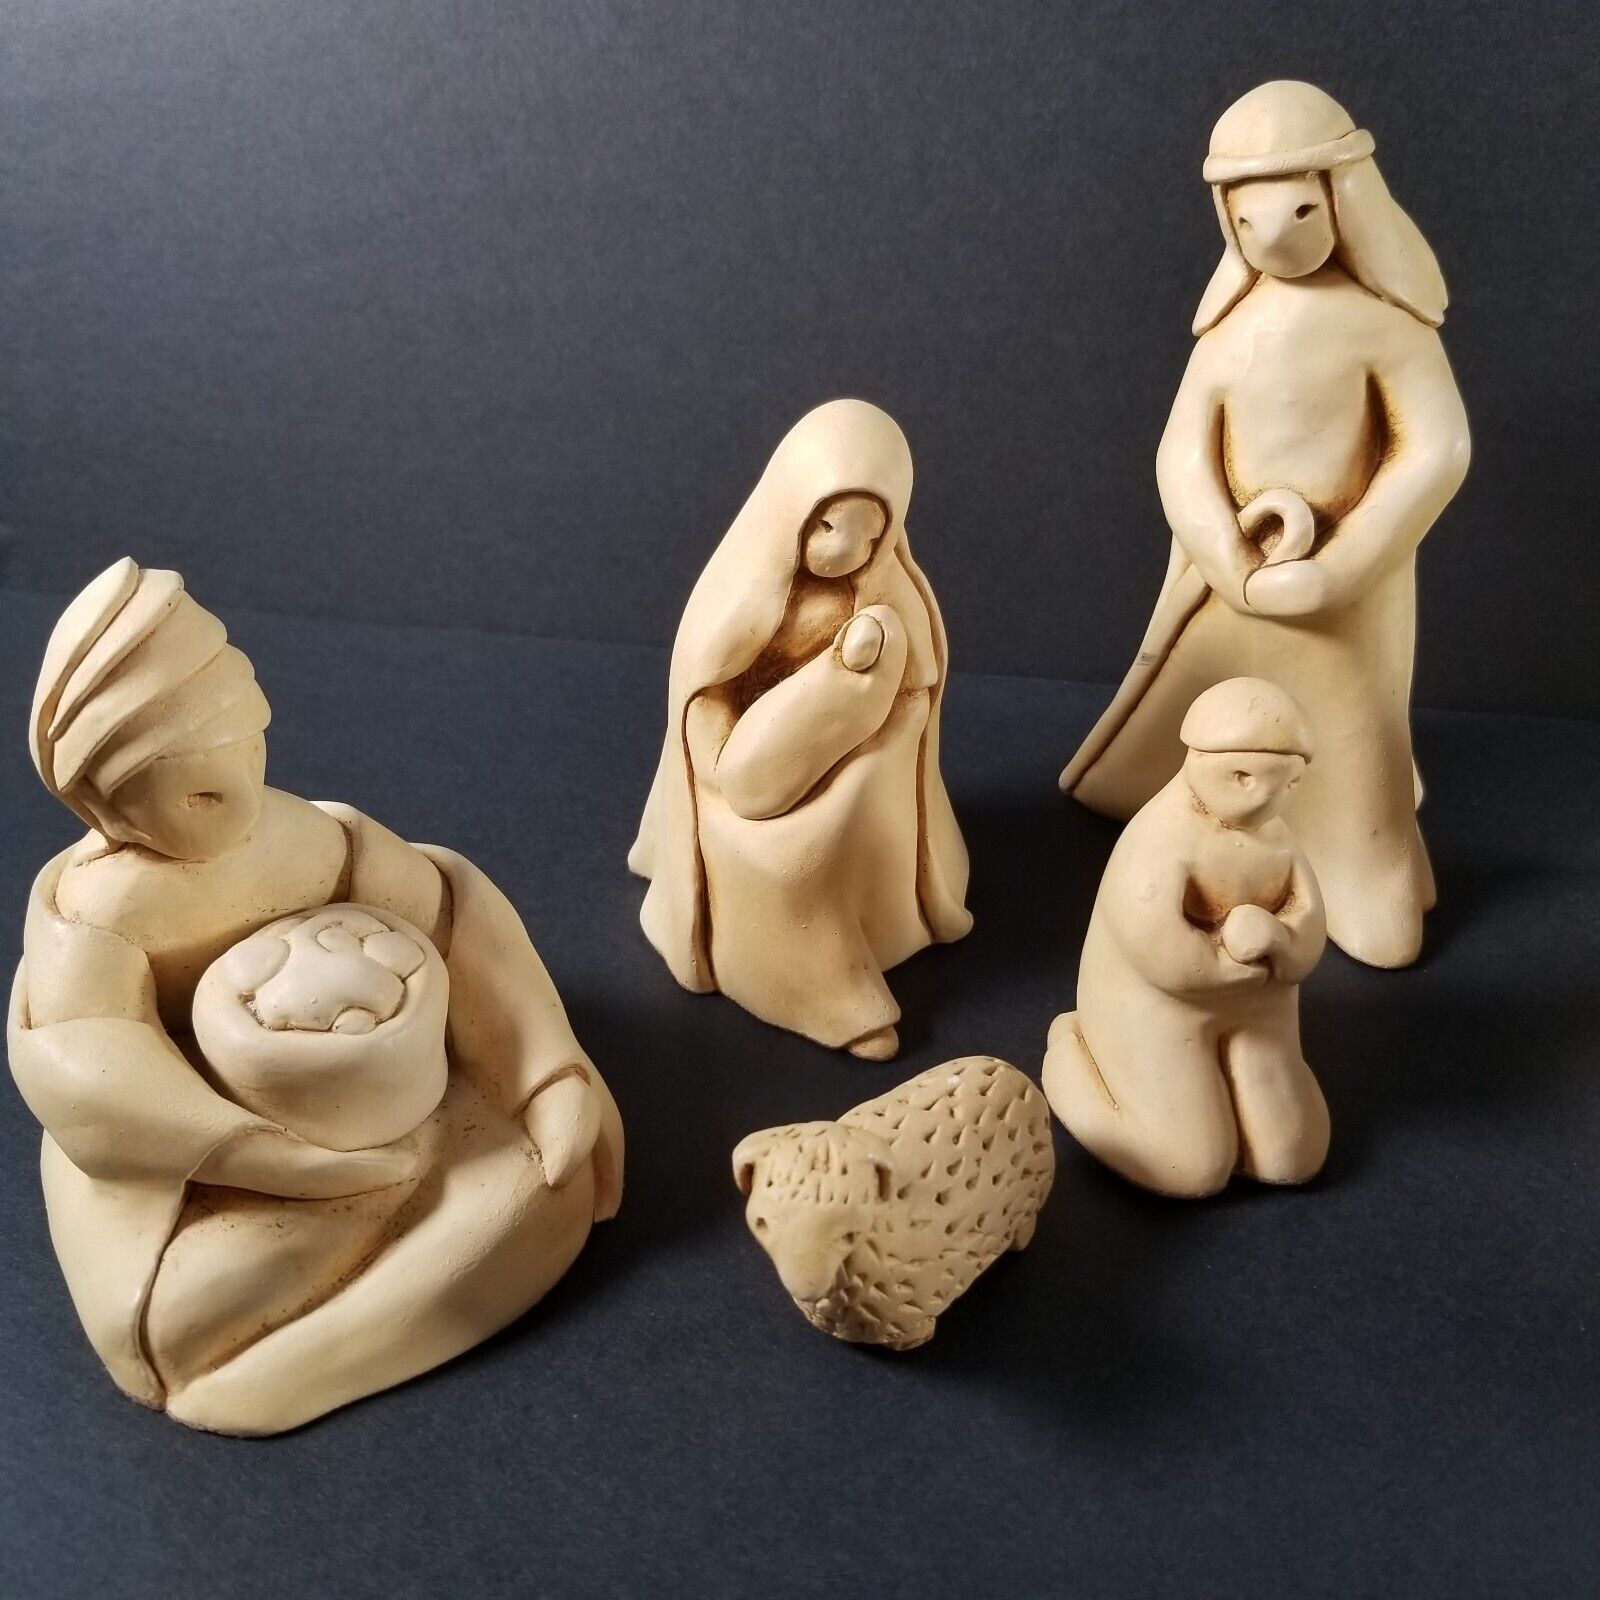 Nativity Scene 7 Piece Set Collection Marty Sculpture Art Hand Crafted Vintage